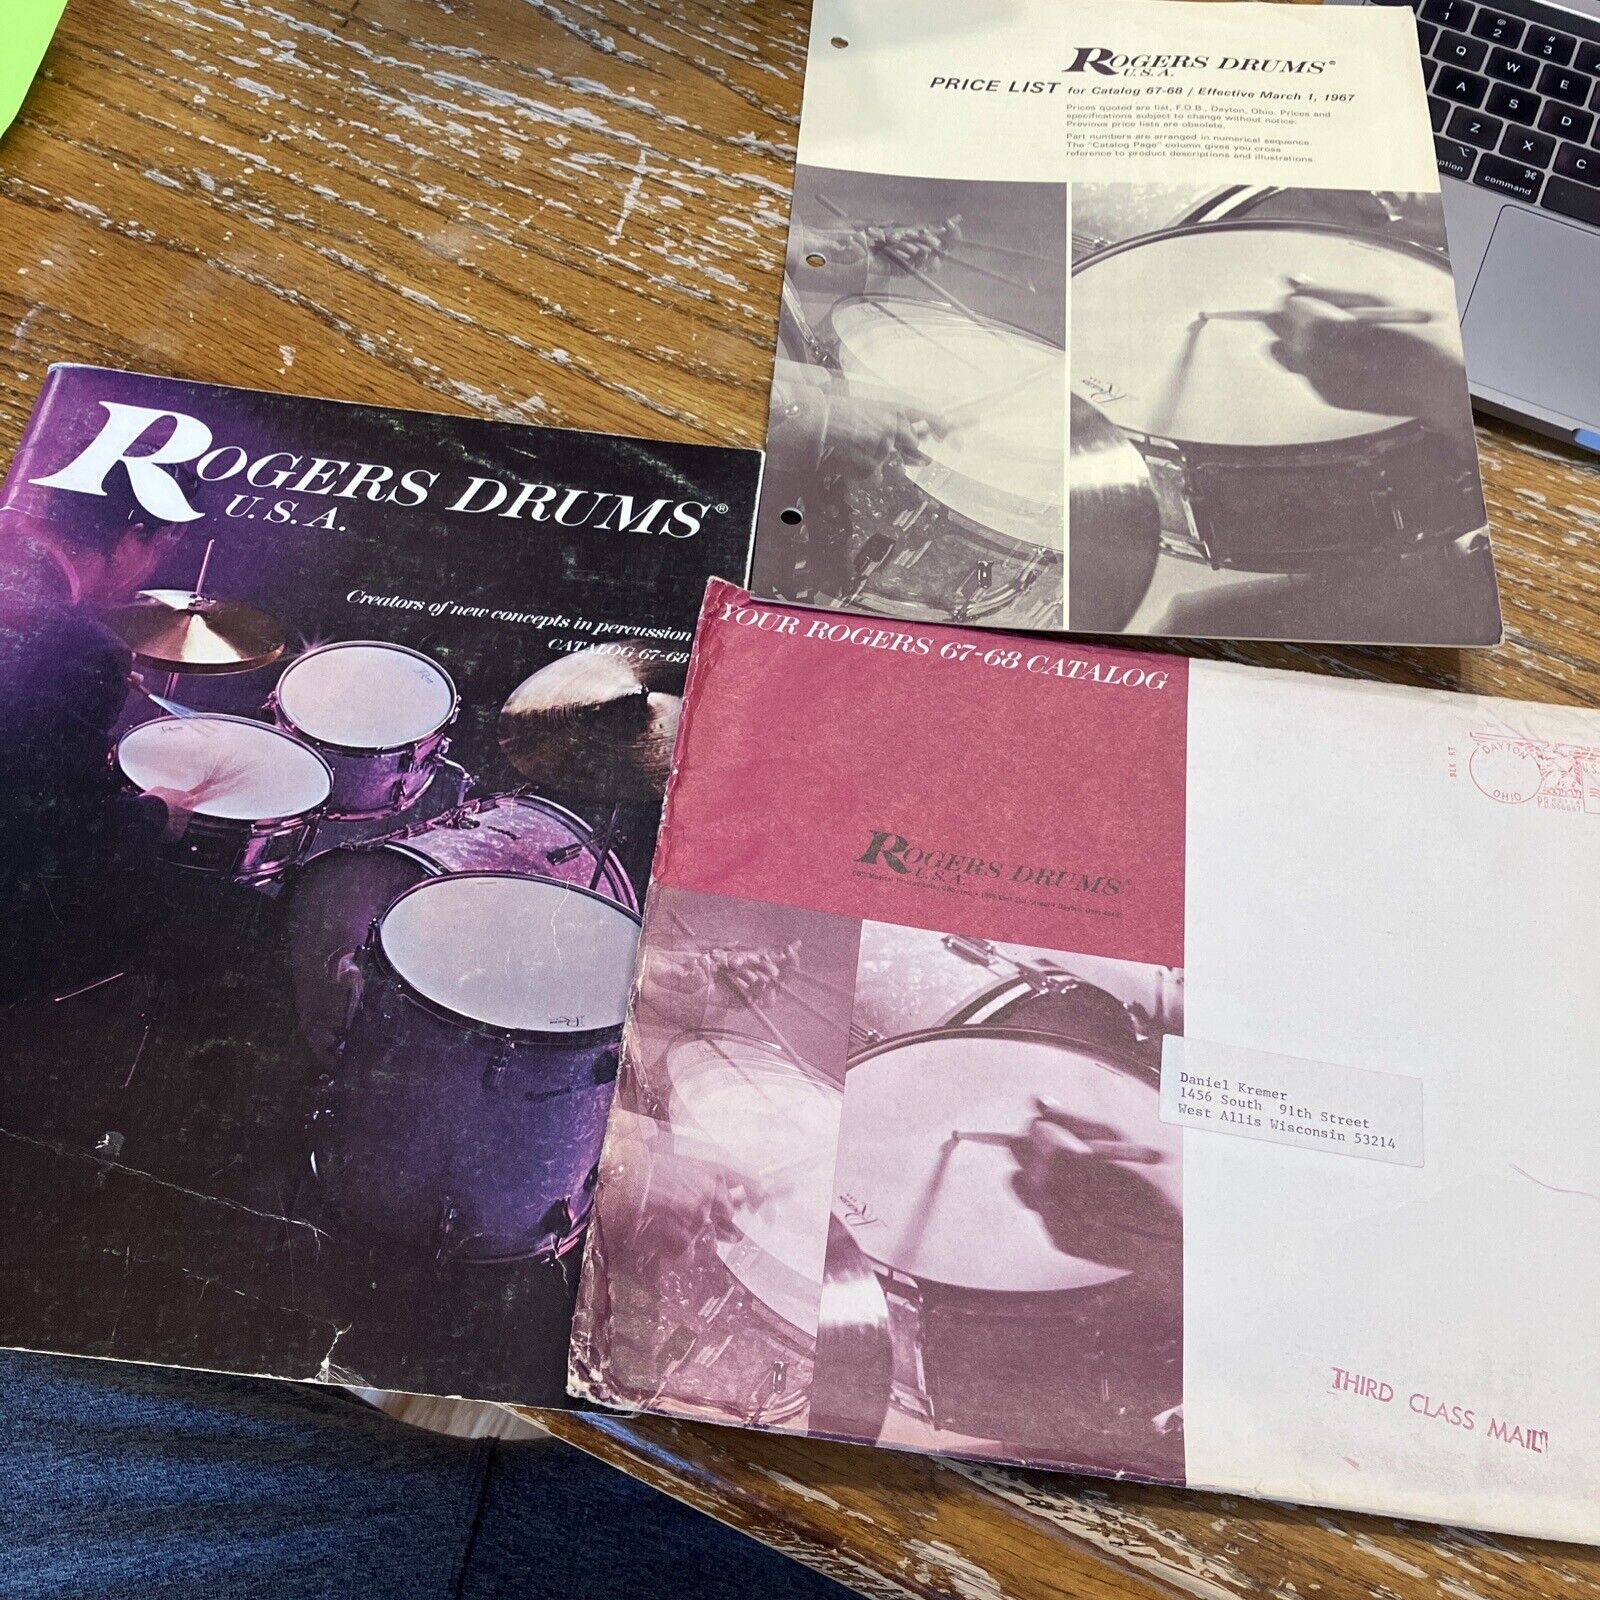 ROGERS Drums Vintage Percussion 1967-1967 Catalog & Price List